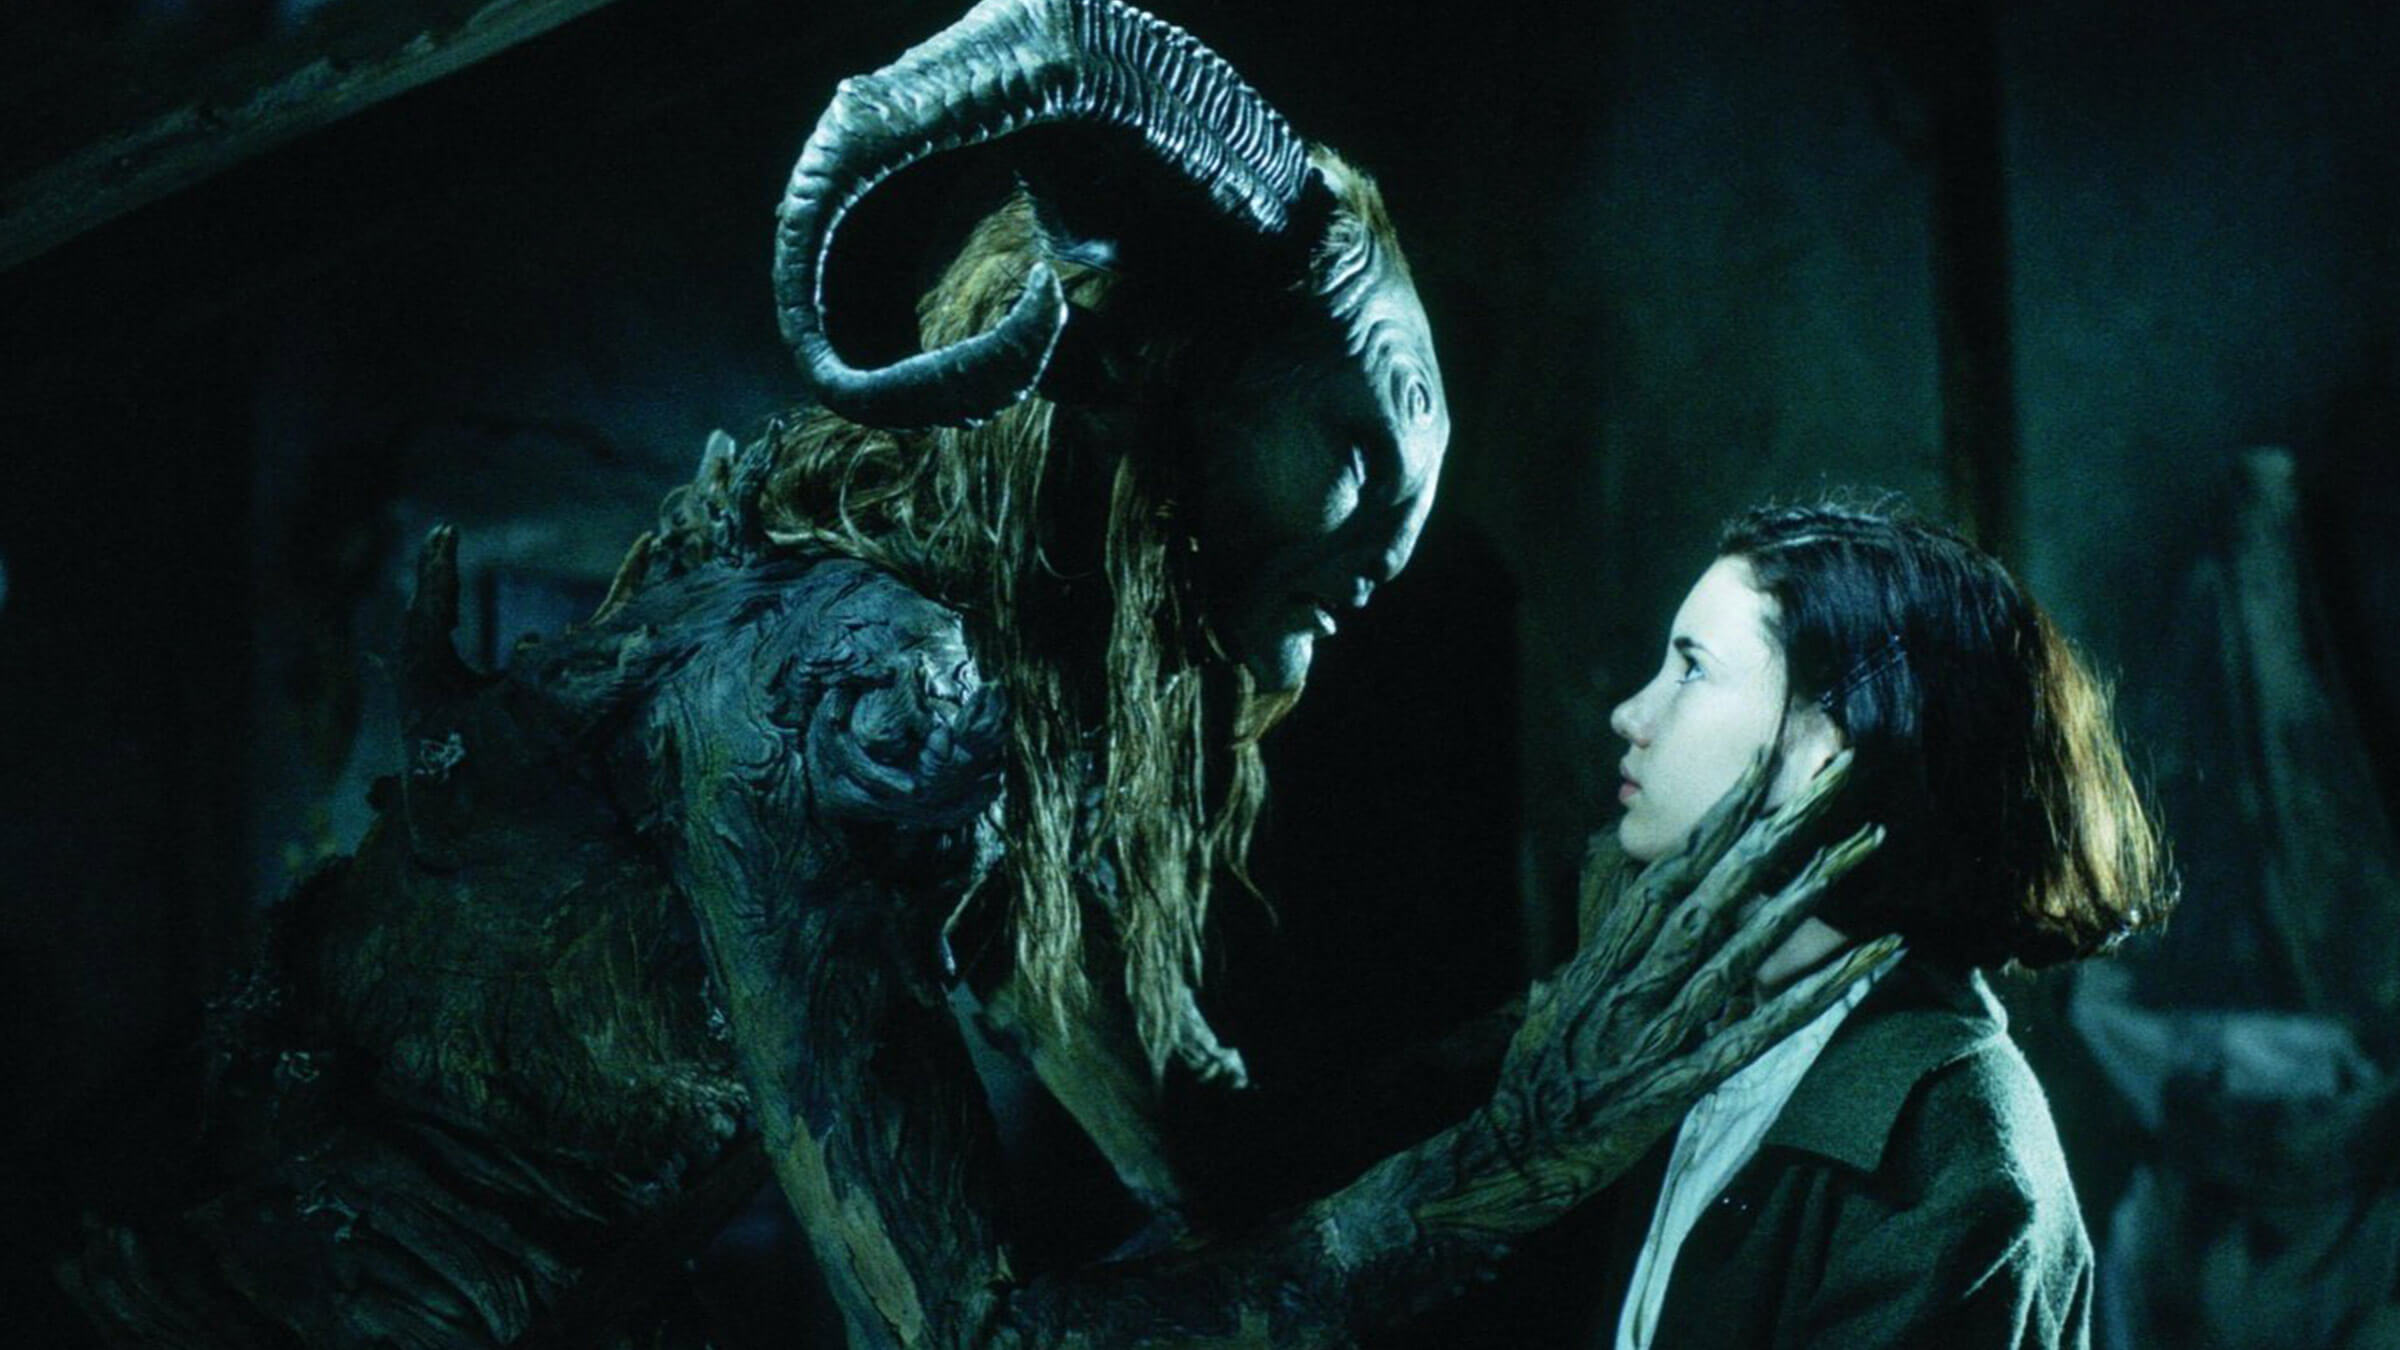 The Passion of Storytelling Traditions in Guillermo del Toro Films